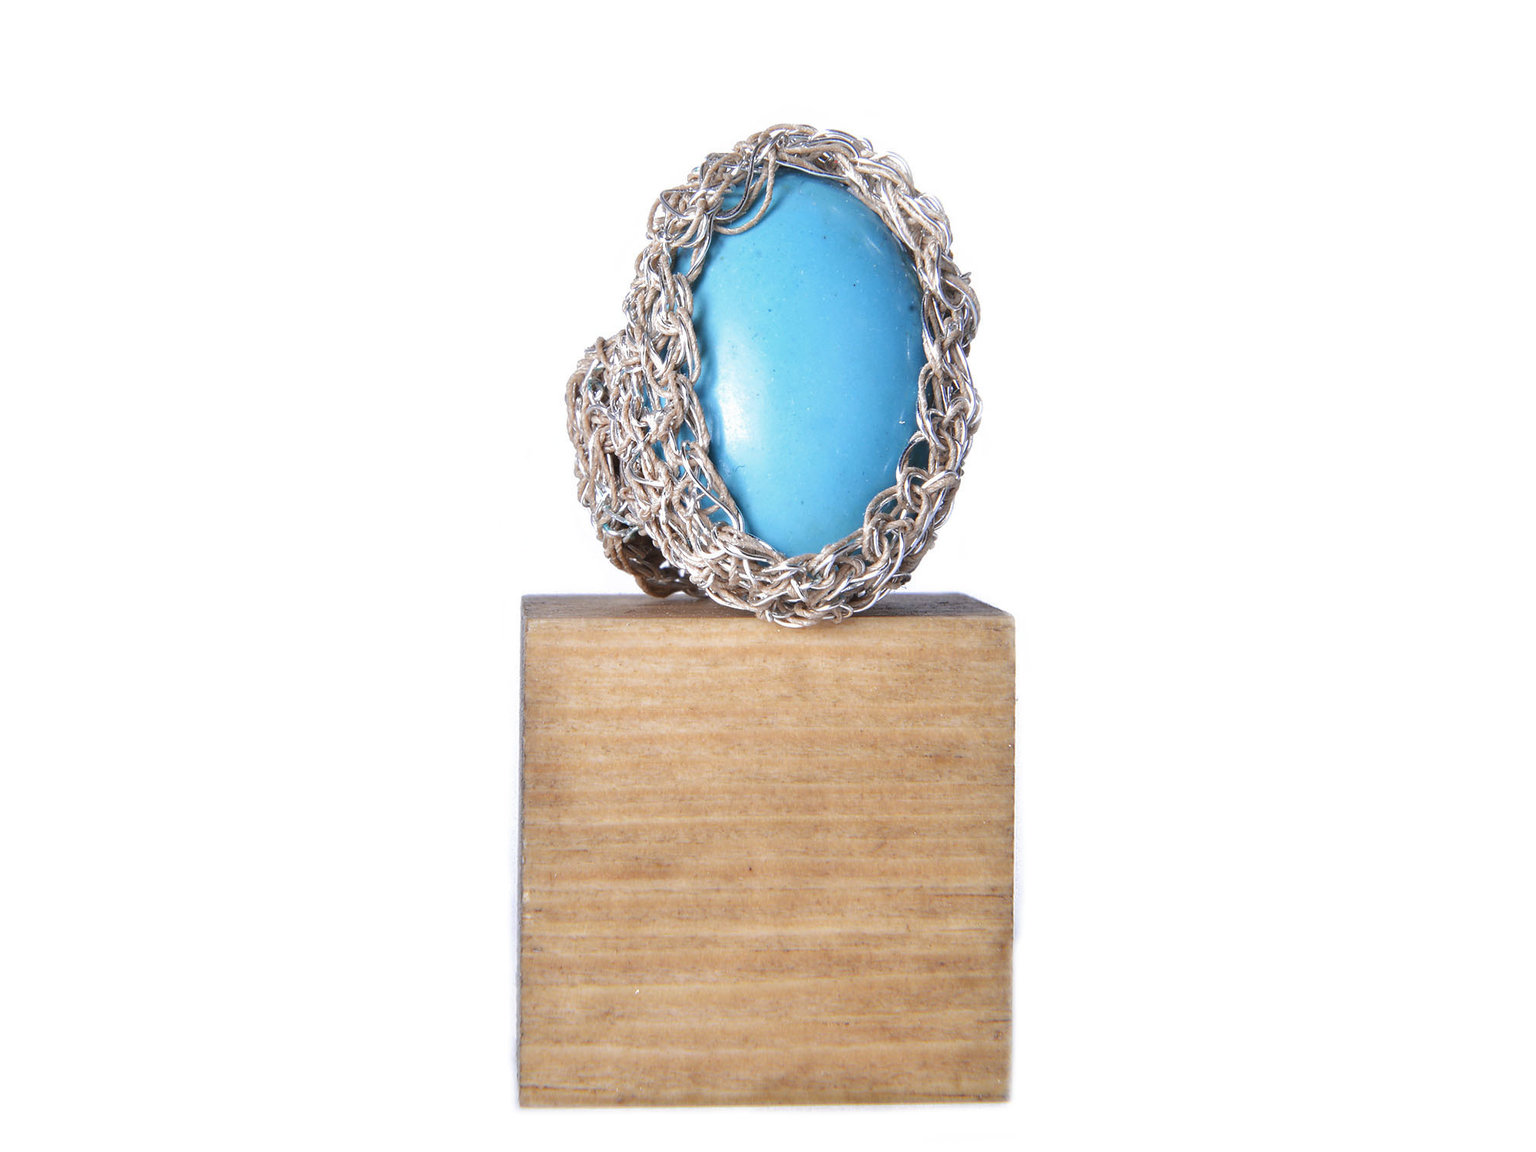 Handknitted ring with turquoise